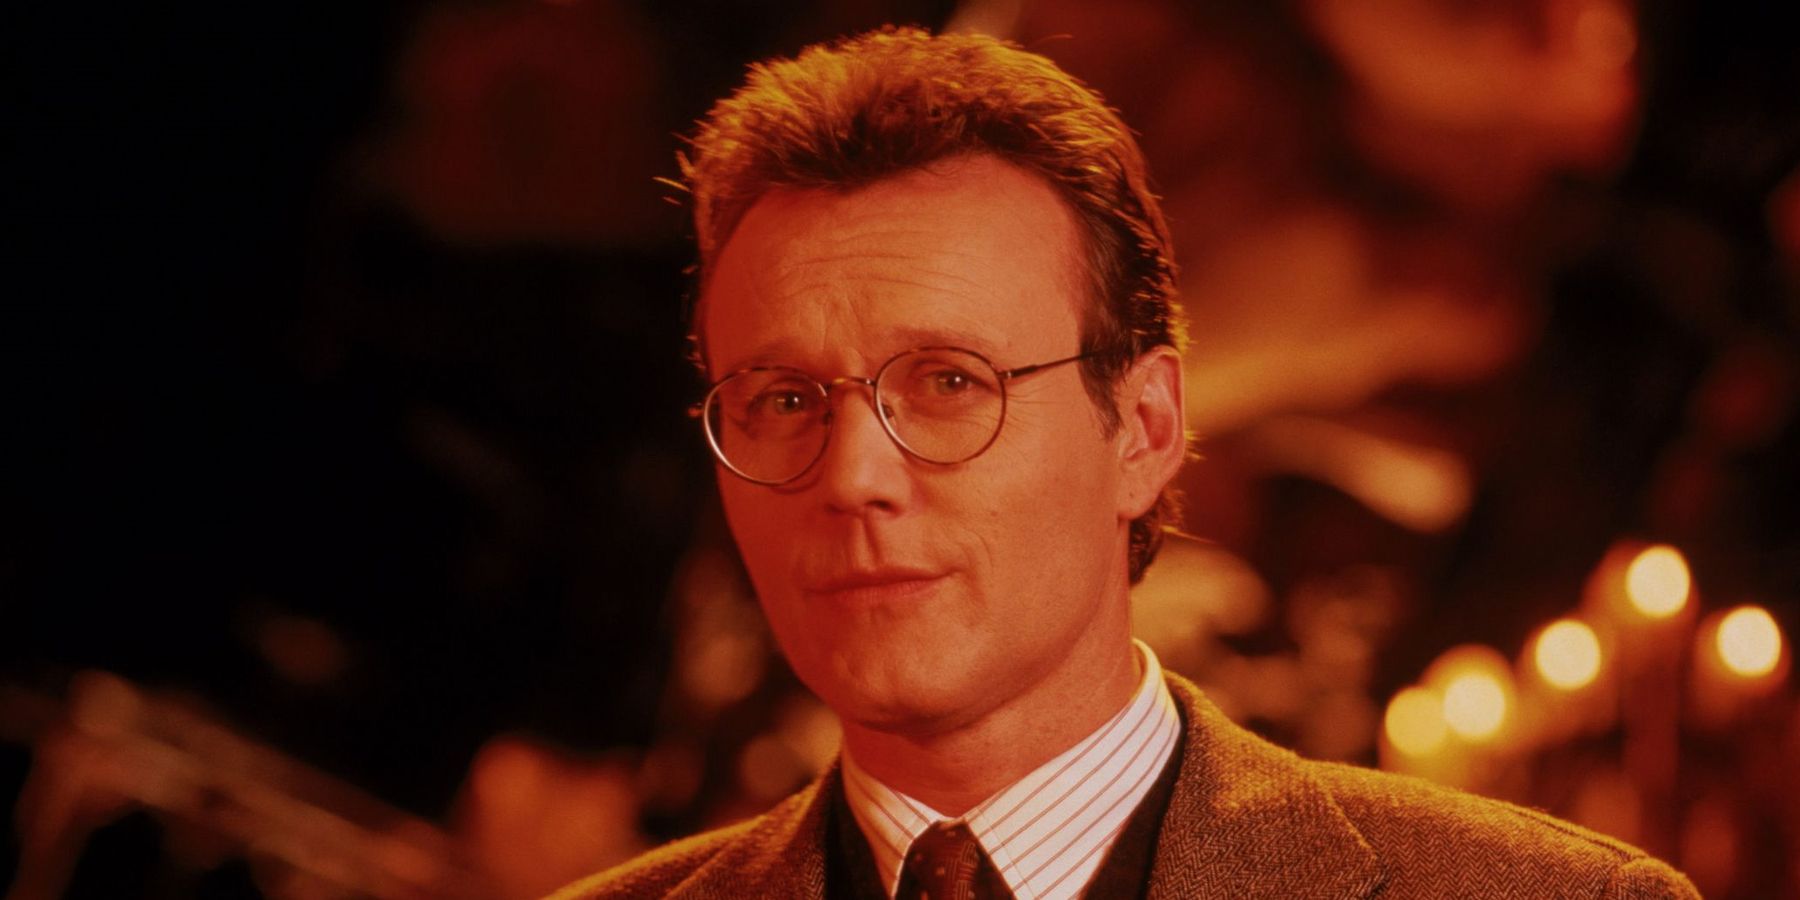 Giles from Buffy the Vampire Slayer